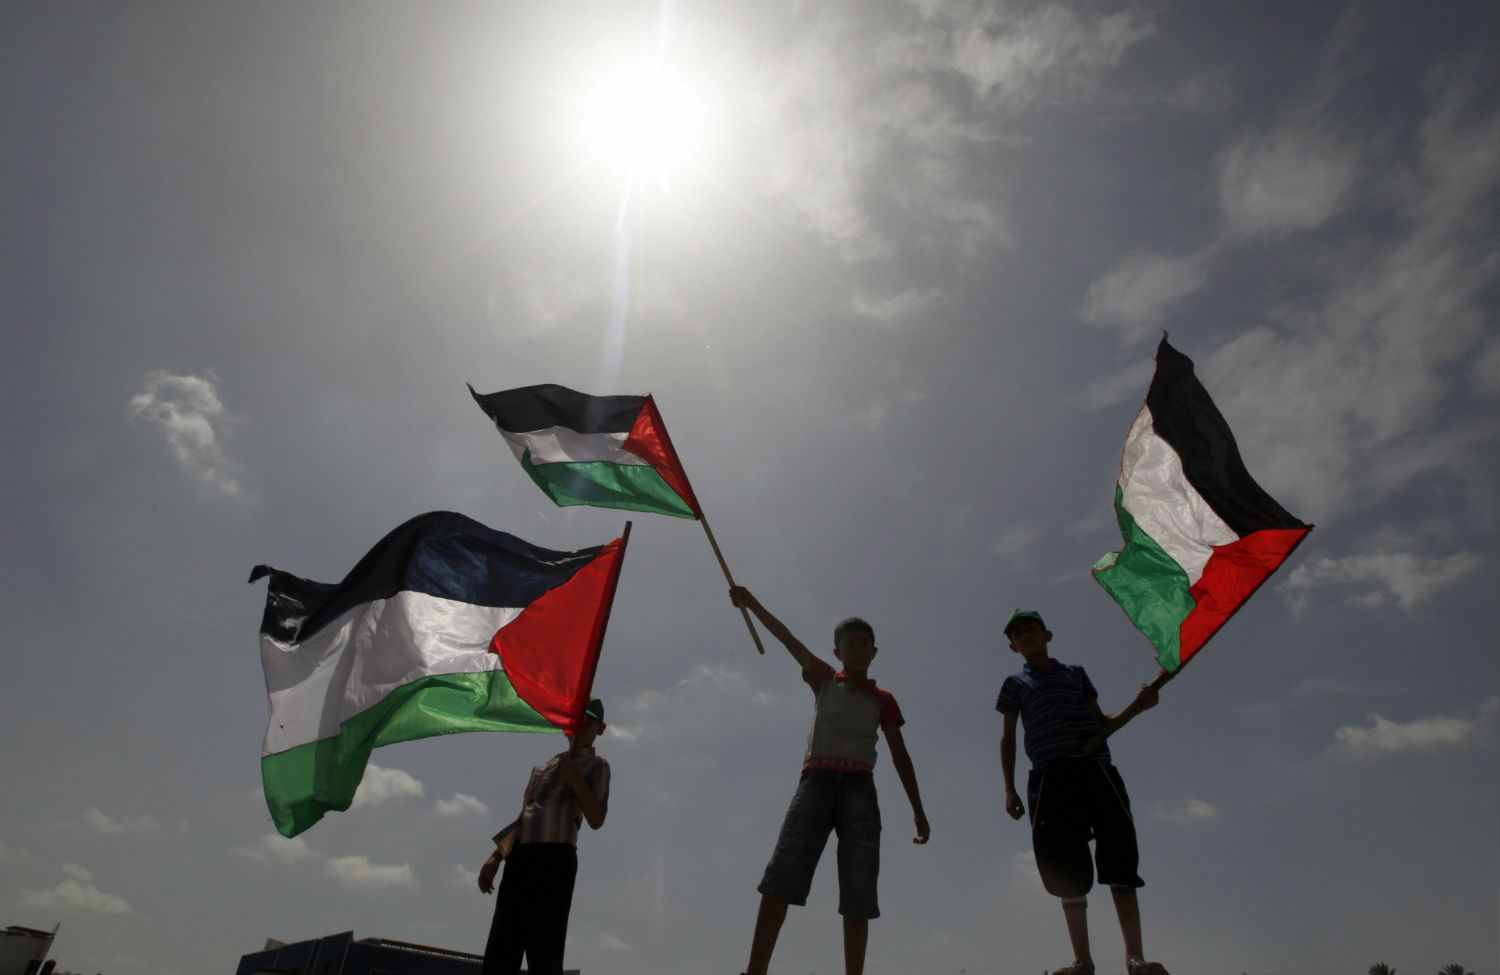  Palestinian boys wave national flags near the Erez border crossing between Gaza and Israel. (AP Photo/Hatem Moussa, File)